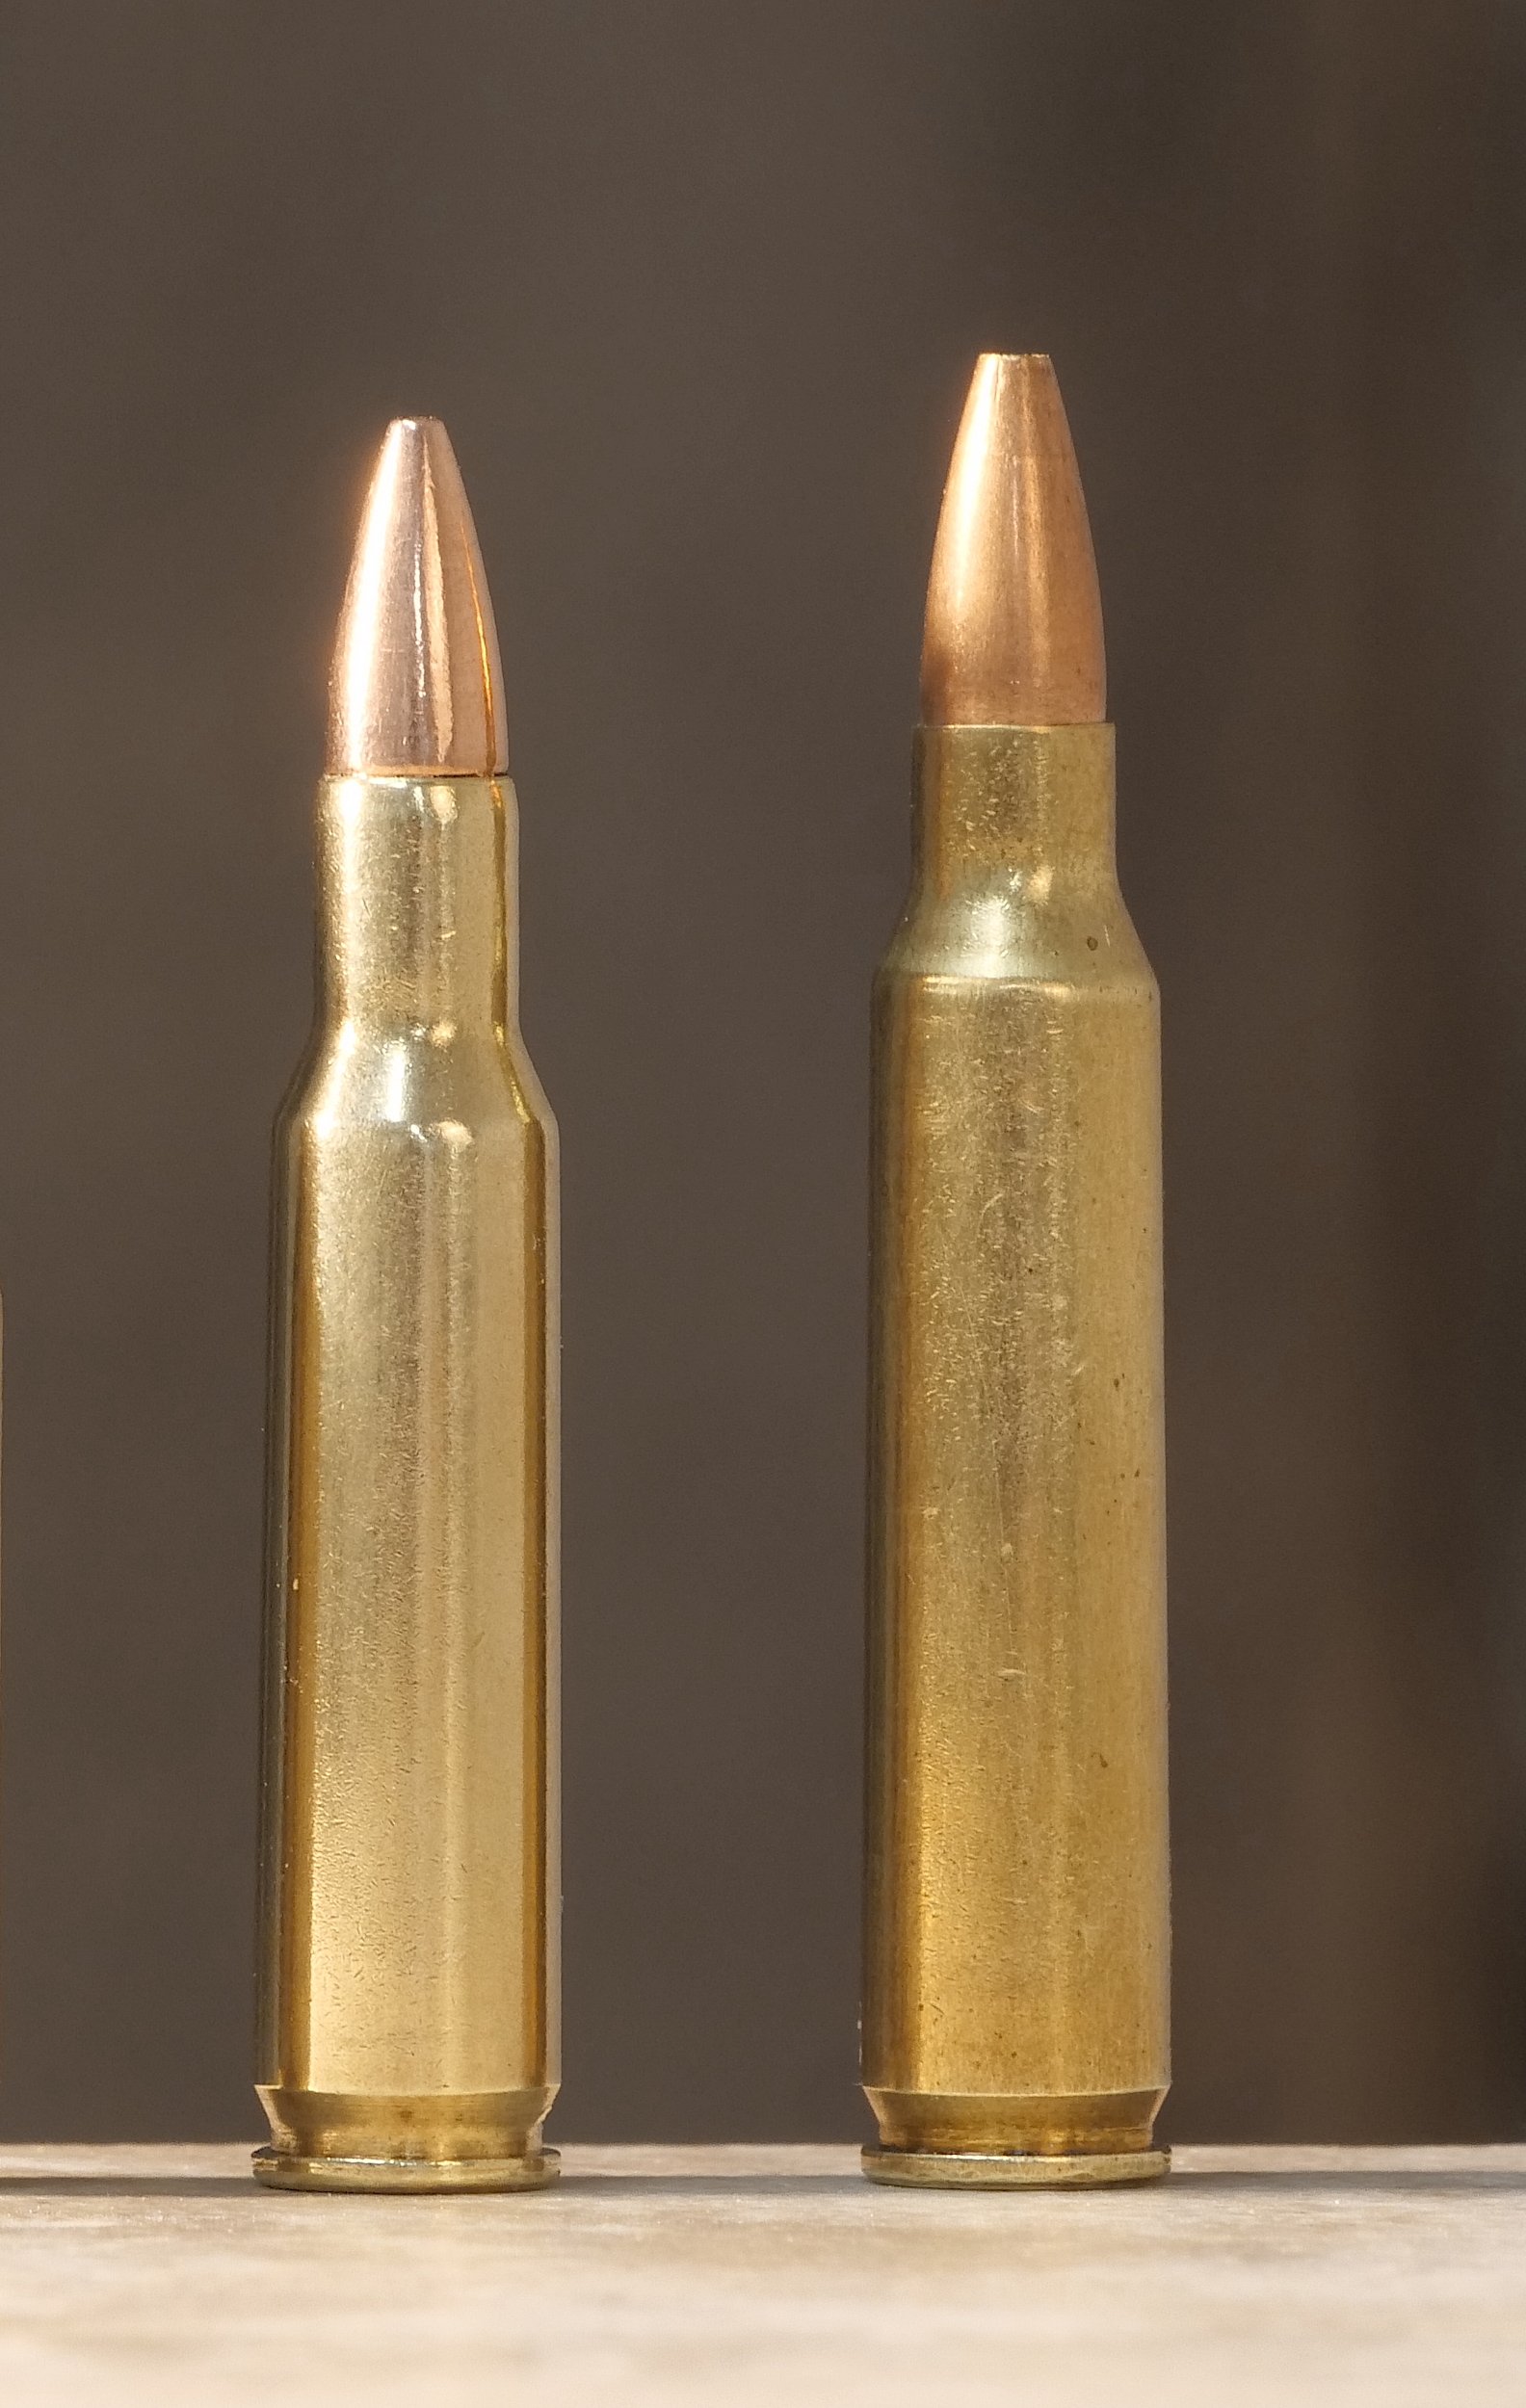 22LR vs 223 (5.56mm) what's the difference?